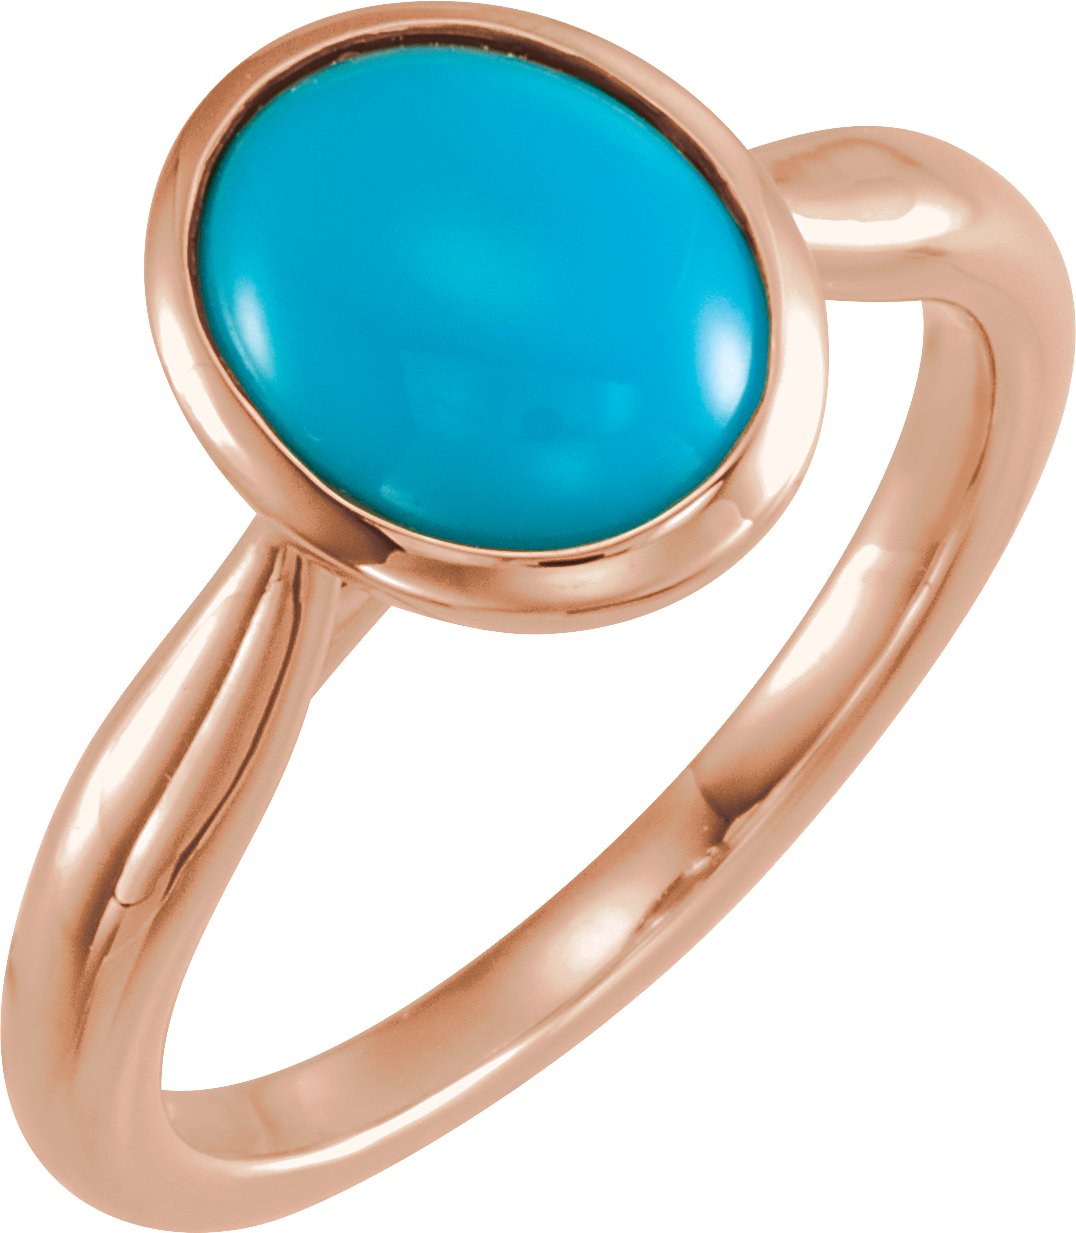 14K Rose 10x8 mm Oval Cabochon Turquoise Ring